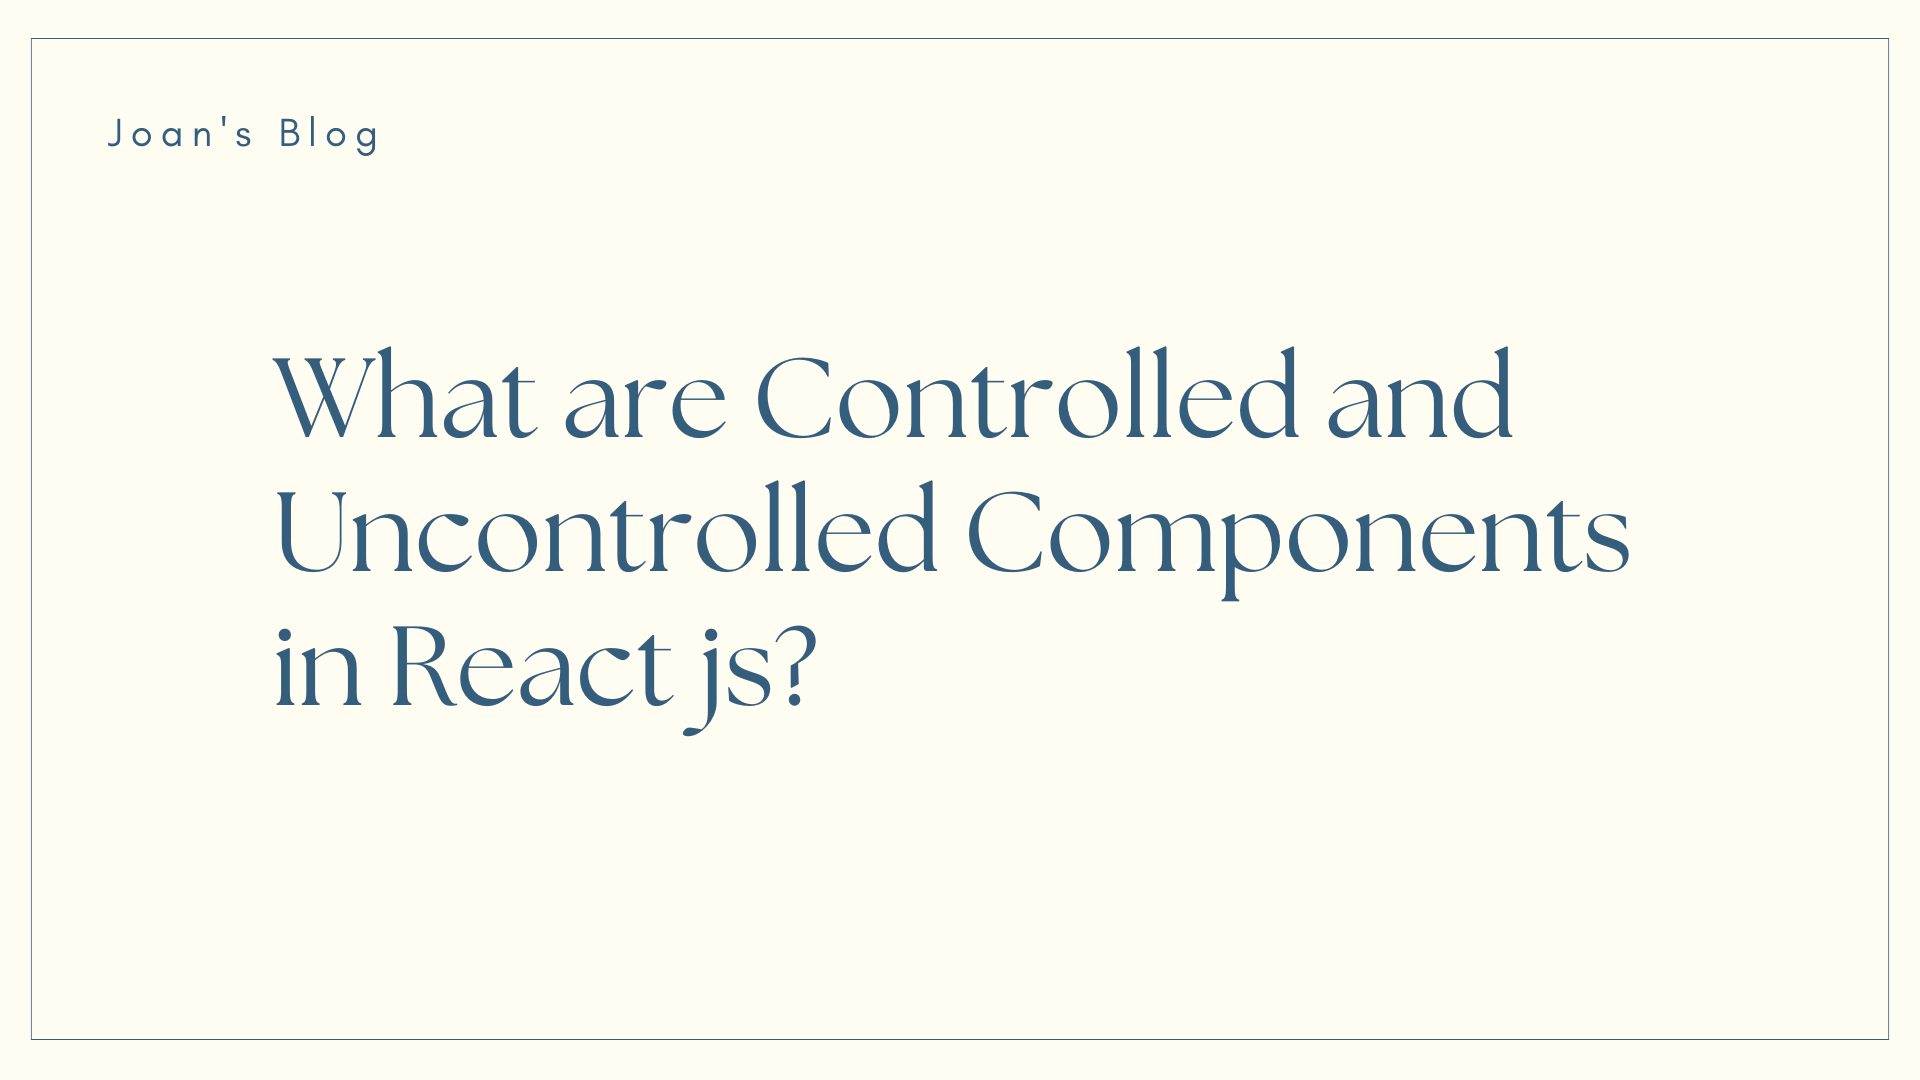 What are Controlled and Uncontrolled Components in React.js?